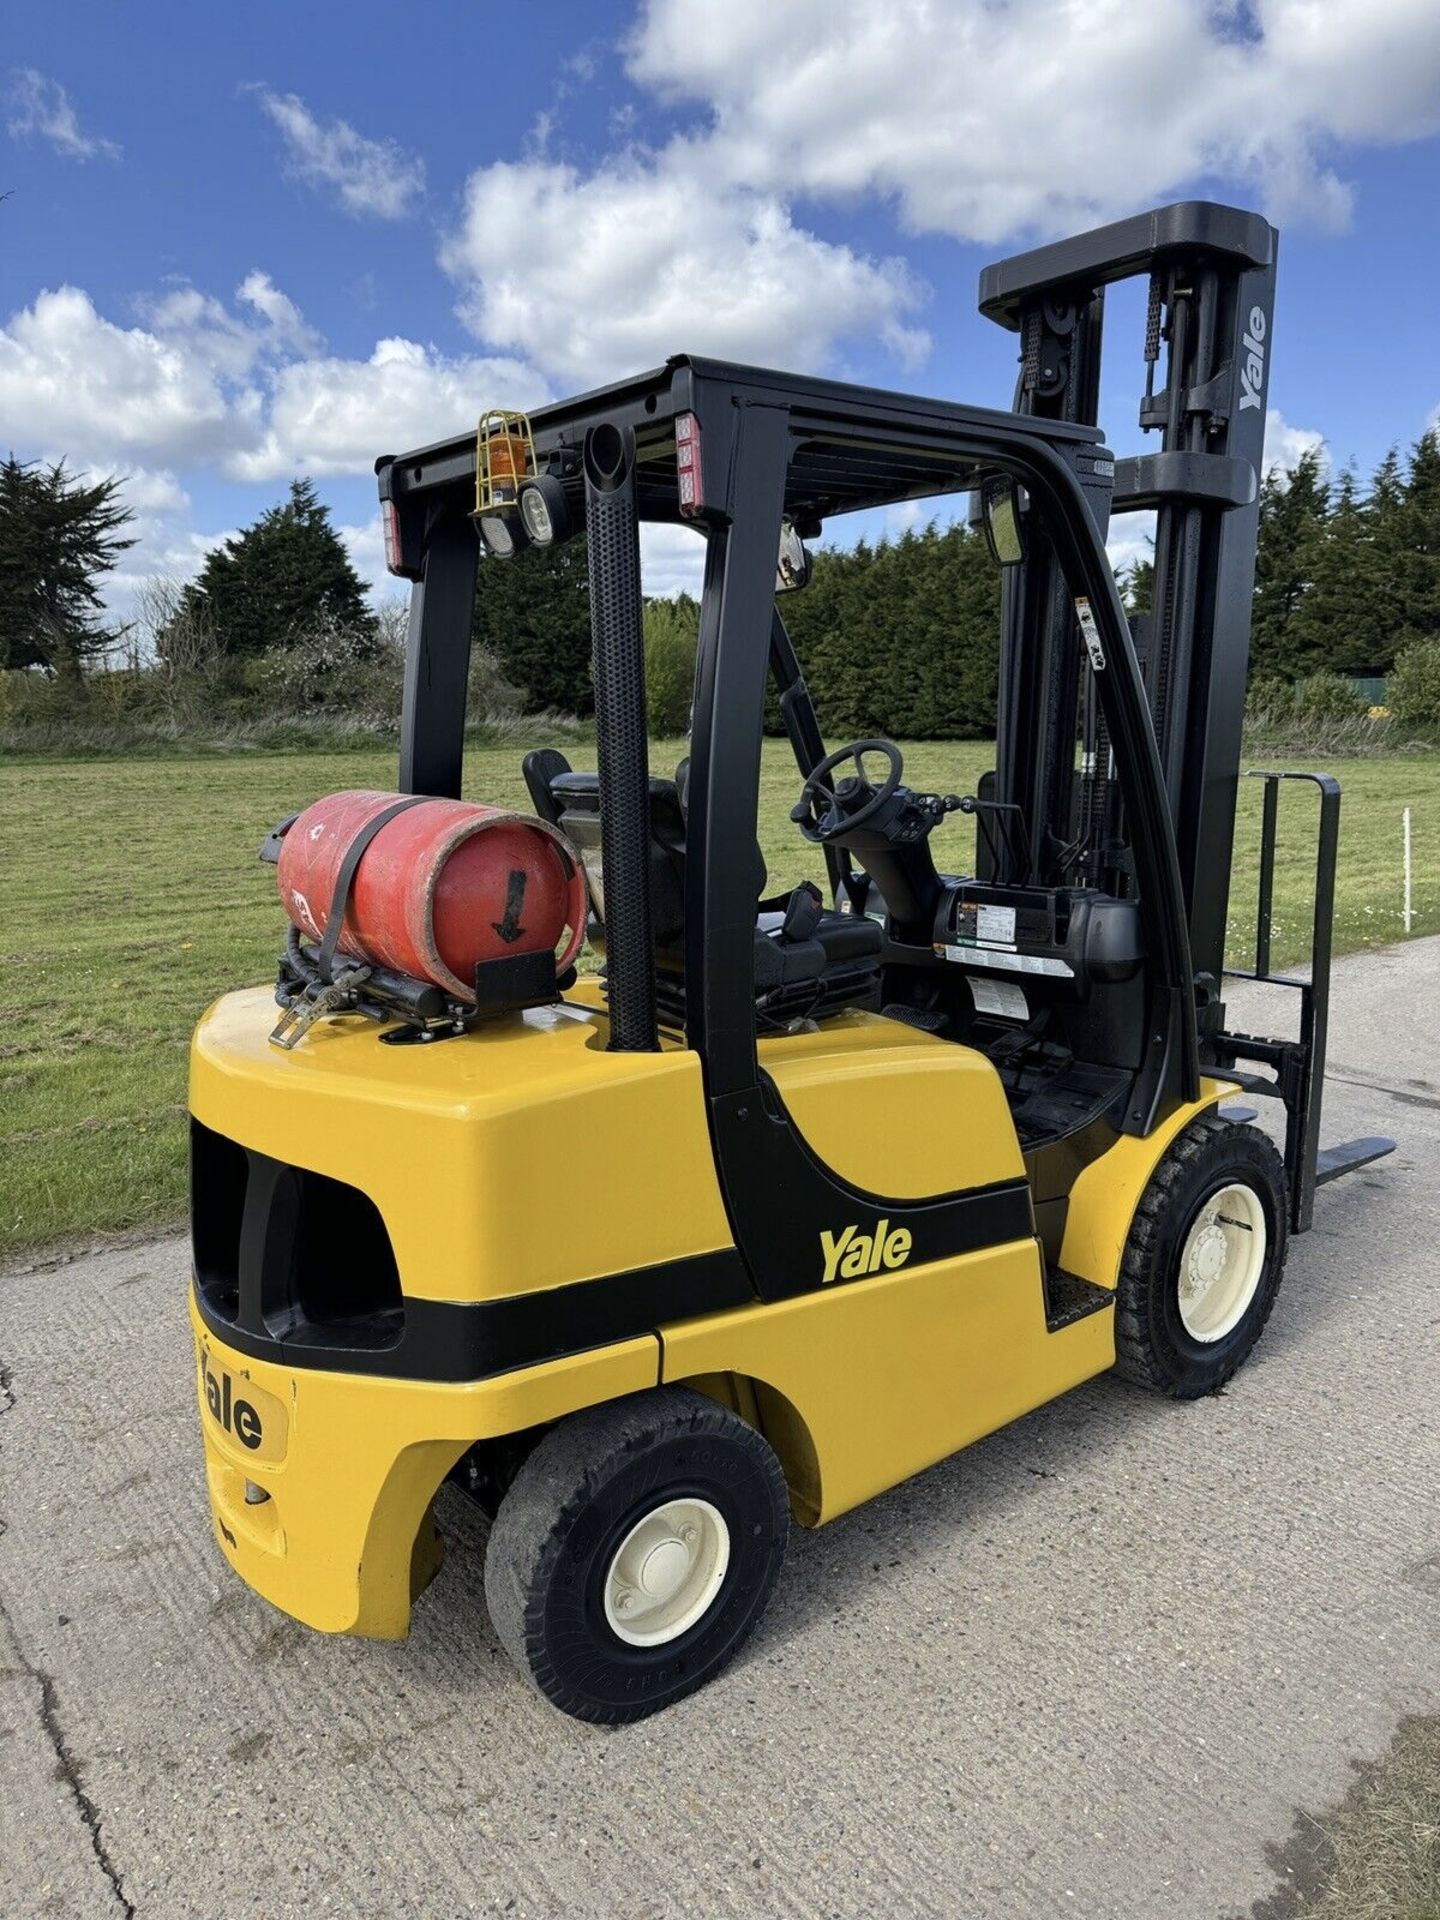 2017 - YALE Gas Forklift Truck (5.9 m lift) - Only 2200 Hours - Image 5 of 7